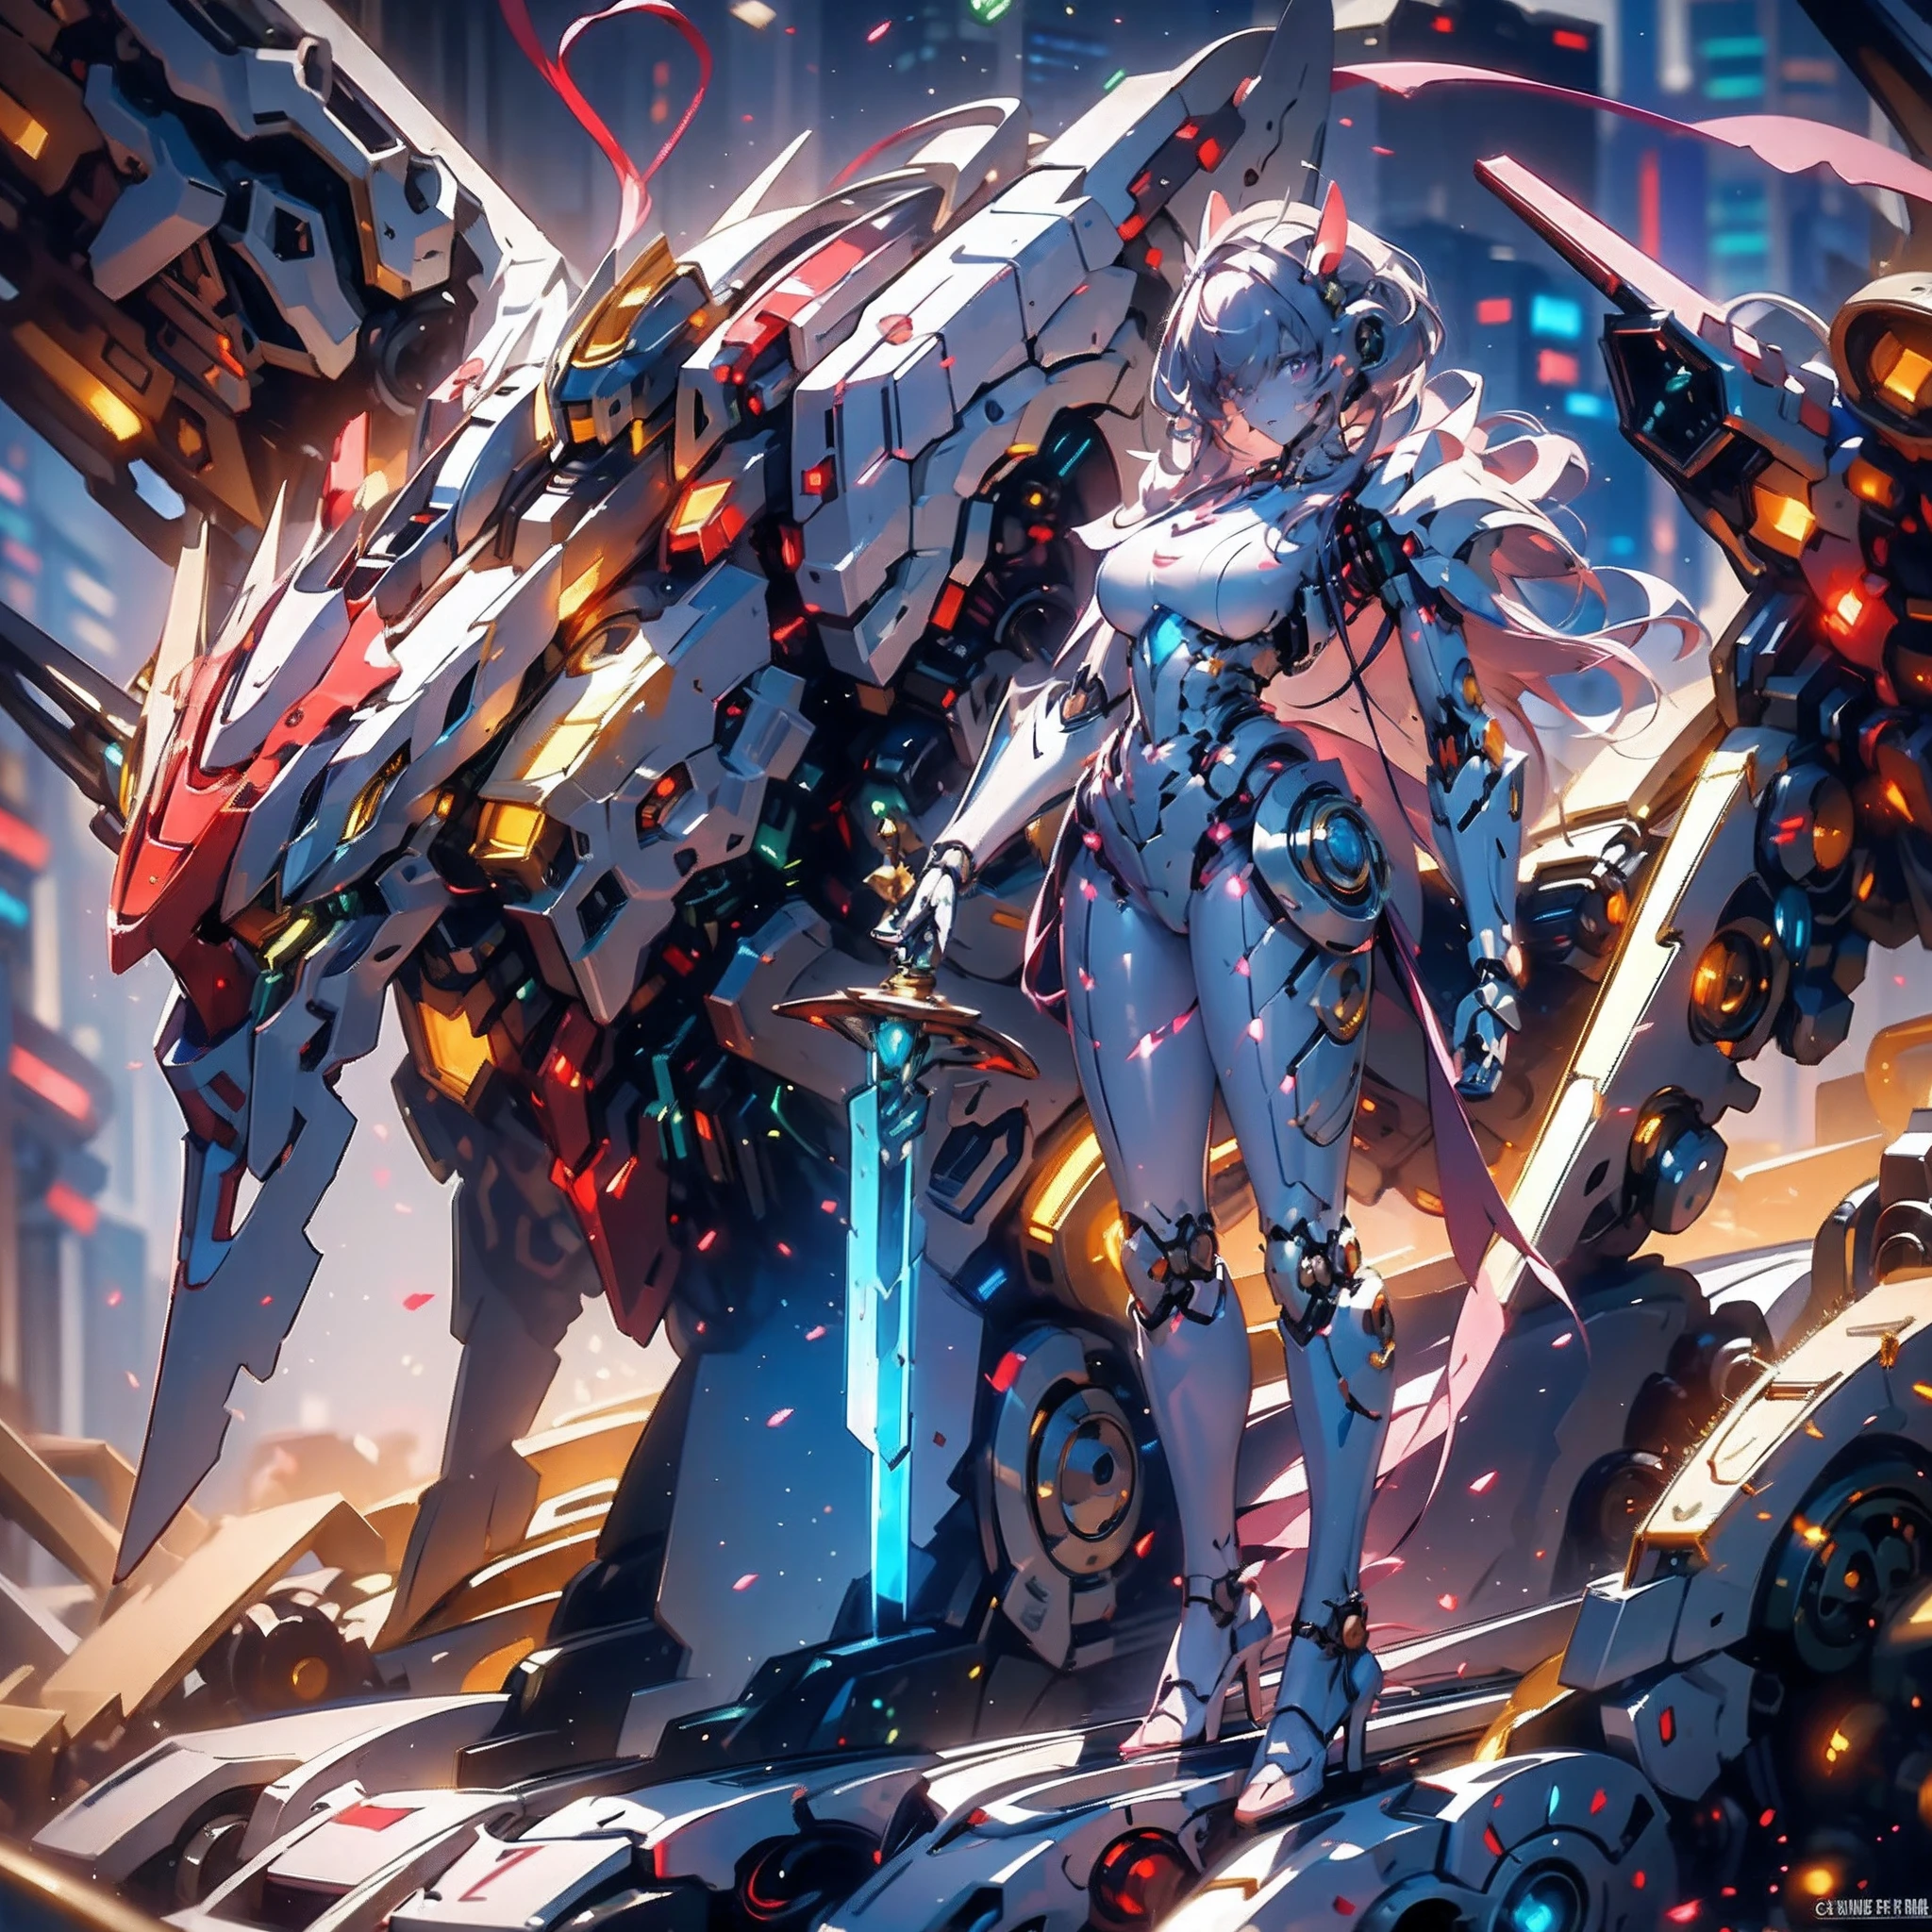 (masterpiece:1.2), best quality,PIXIV,
Robotic knight,full mythical set of armour, readymade for war, absolutely stunning art, extremely detailed, highest quality digital art